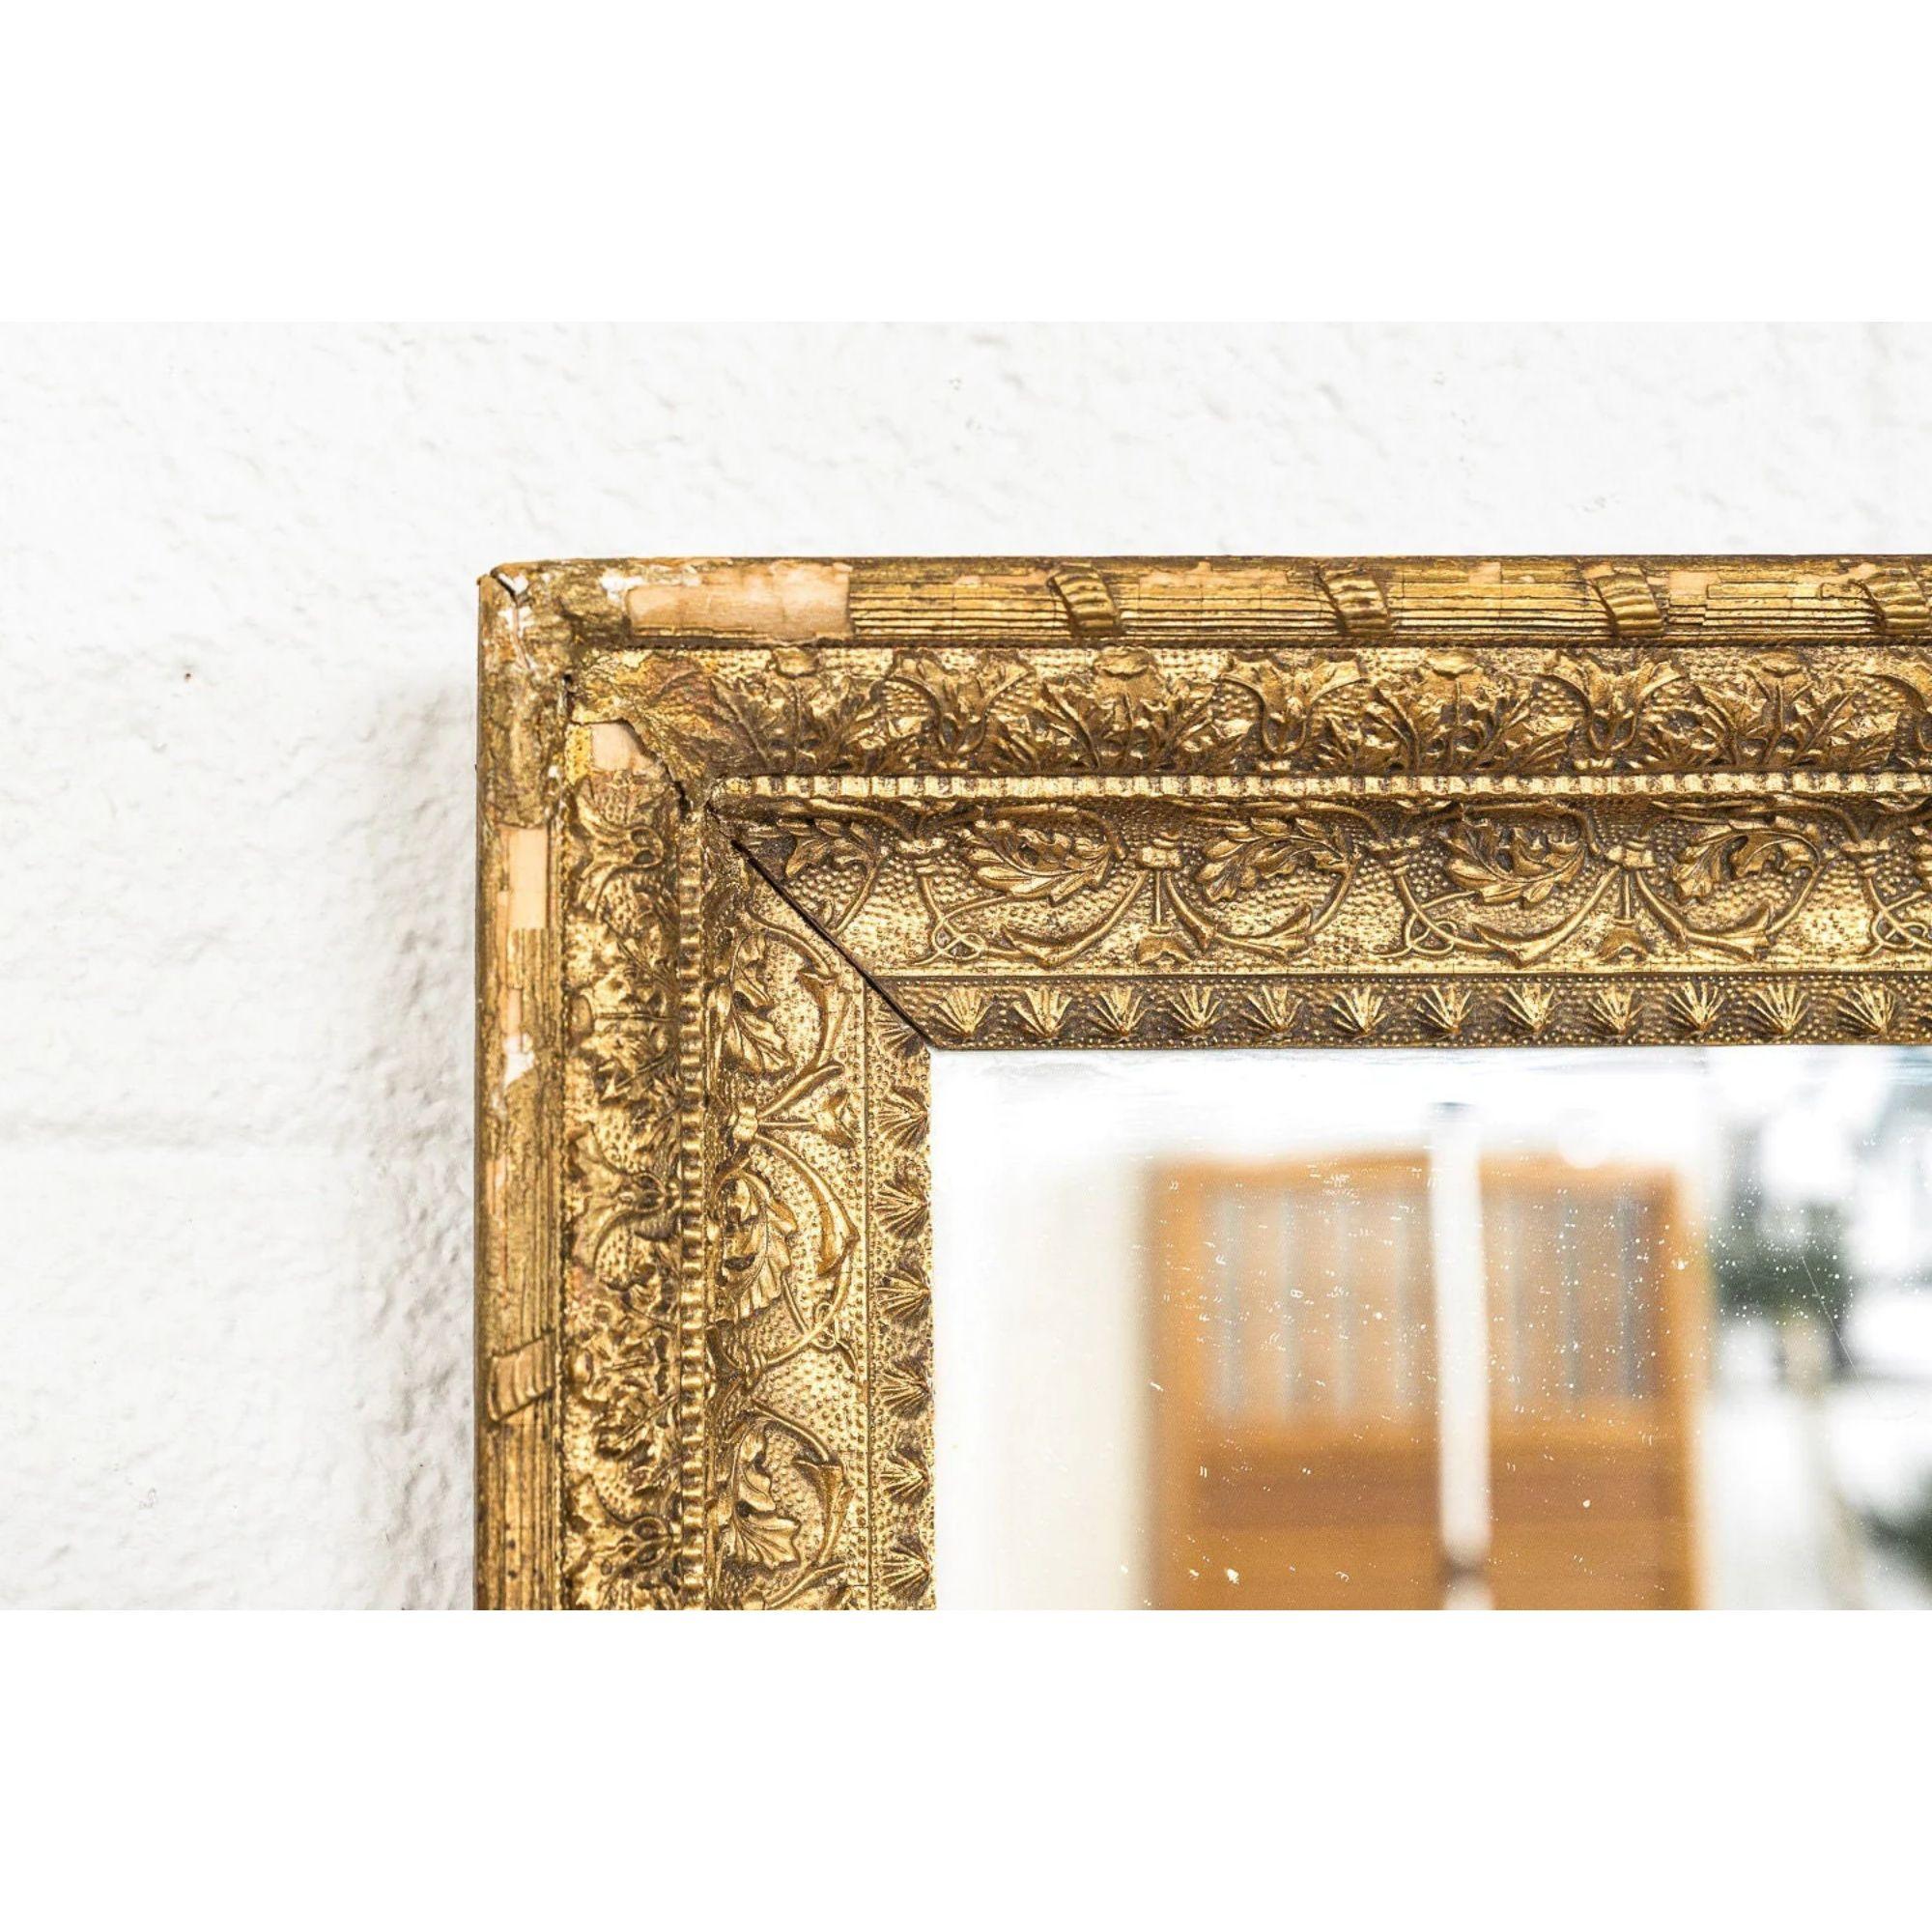 Vintage Antique Ornate Gold Decorative Hanging Wall Mirror In Good Condition For Sale In Detroit, MI